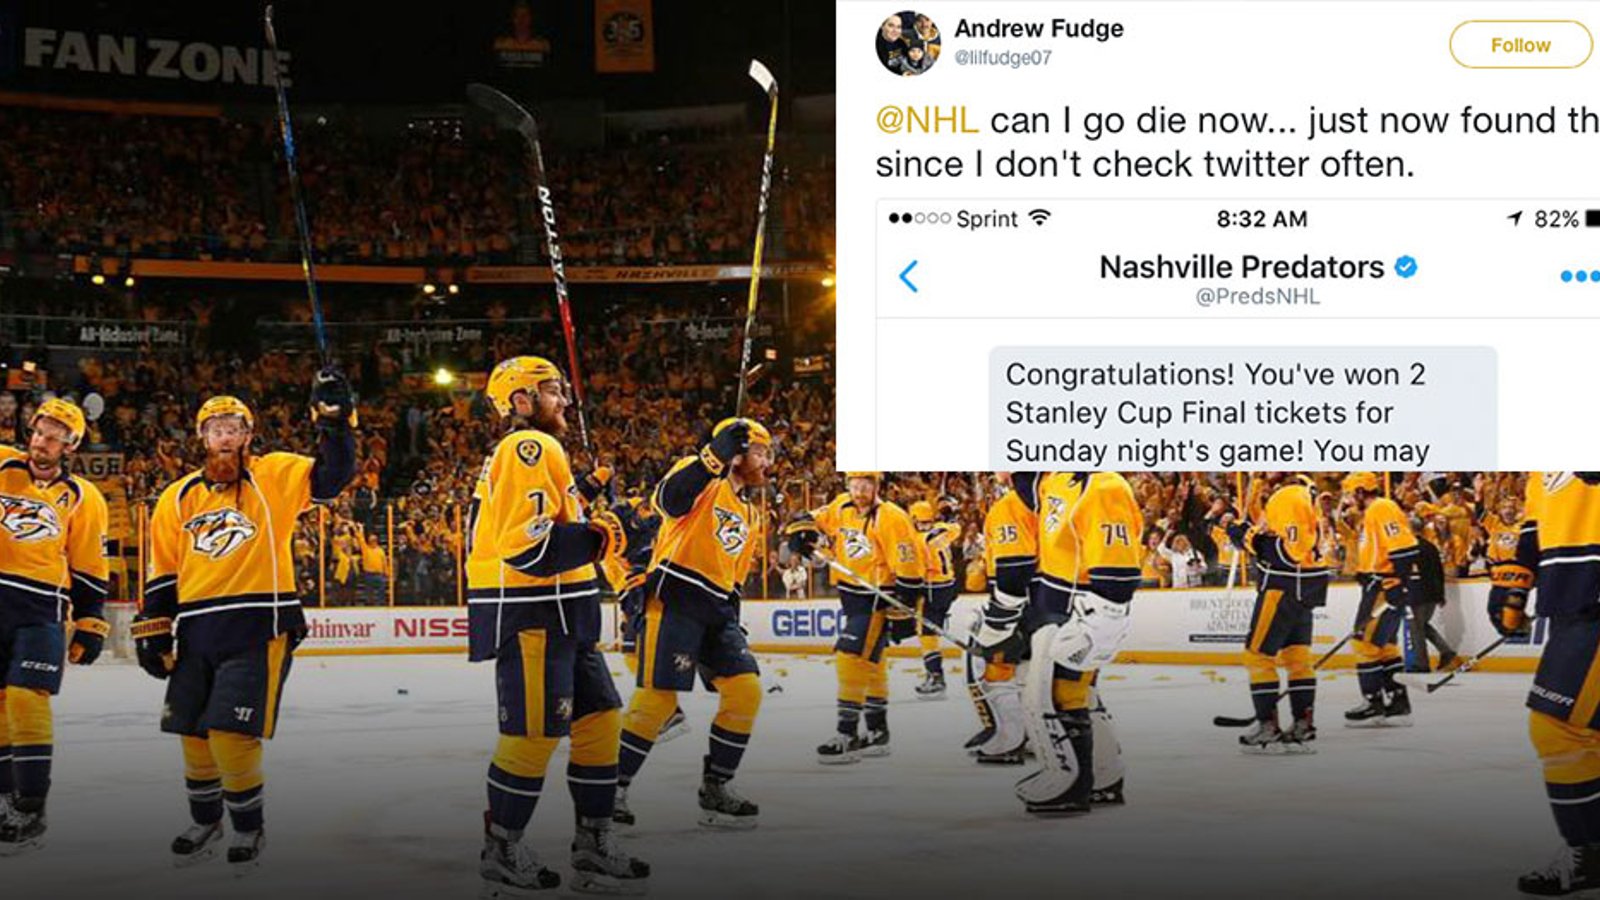 Preds fan discovers free Stanley Cup Final tickets 5 weeks too late…